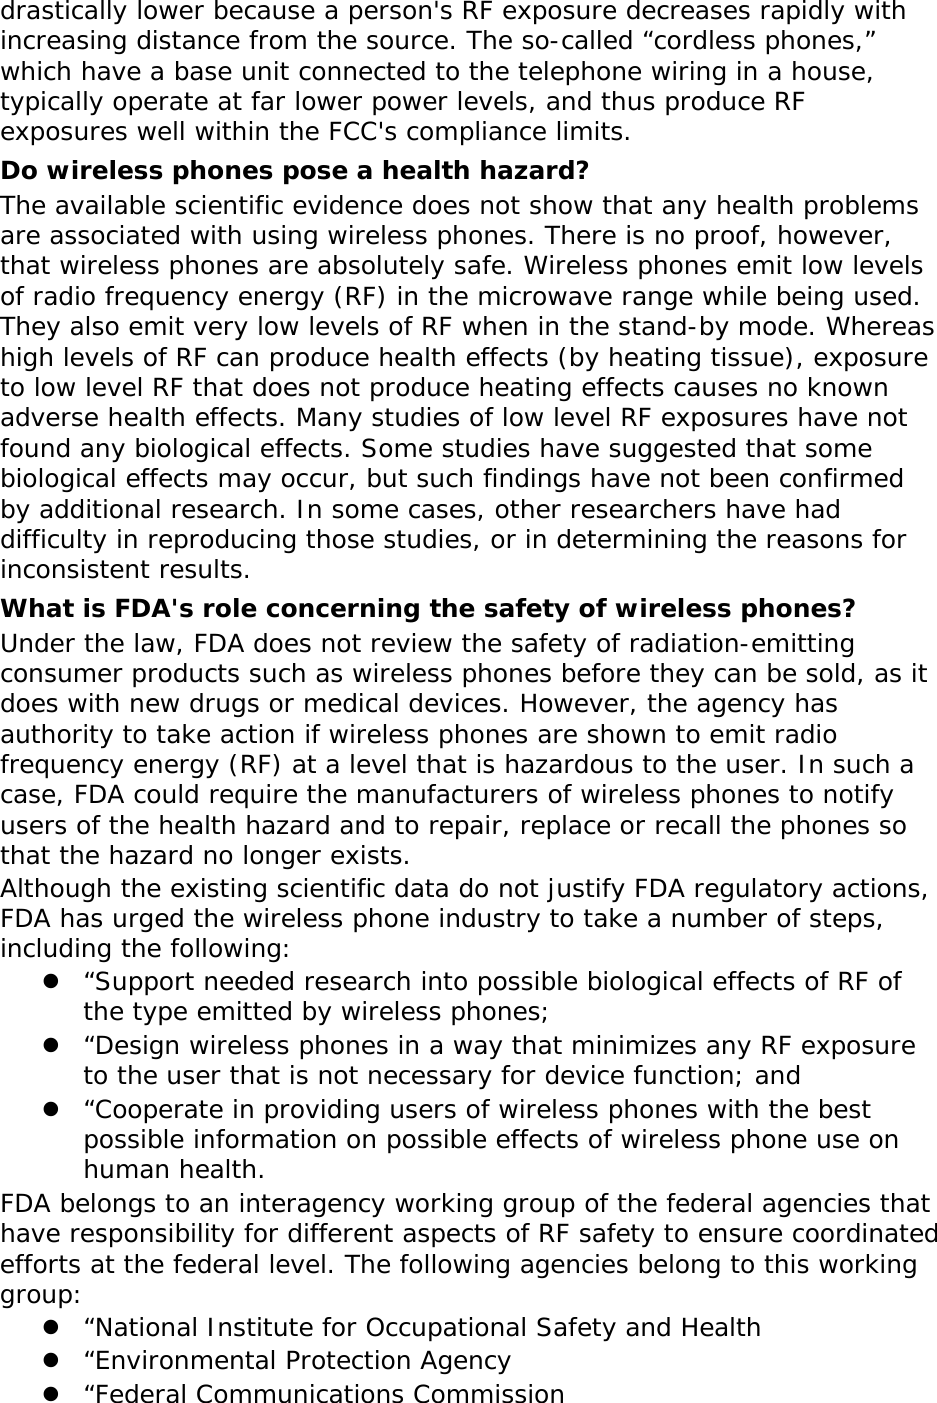   drastically lower because a person&apos;s RF exposure decreases rapidly with increasing distance from the source. The so-called “cordless phones,” which have a base unit connected to the telephone wiring in a house, typically operate at far lower power levels, and thus produce RF exposures well within the FCC&apos;s compliance limits. Do wireless phones pose a health hazard? The available scientific evidence does not show that any health problems are associated with using wireless phones. There is no proof, however, that wireless phones are absolutely safe. Wireless phones emit low levels of radio frequency energy (RF) in the microwave range while being used. They also emit very low levels of RF when in the stand-by mode. Whereas high levels of RF can produce health effects (by heating tissue), exposure to low level RF that does not produce heating effects causes no known adverse health effects. Many studies of low level RF exposures have not found any biological effects. Some studies have suggested that some biological effects may occur, but such findings have not been confirmed by additional research. In some cases, other researchers have had difficulty in reproducing those studies, or in determining the reasons for inconsistent results. What is FDA&apos;s role concerning the safety of wireless phones? Under the law, FDA does not review the safety of radiation-emitting consumer products such as wireless phones before they can be sold, as it does with new drugs or medical devices. However, the agency has authority to take action if wireless phones are shown to emit radio frequency energy (RF) at a level that is hazardous to the user. In such a case, FDA could require the manufacturers of wireless phones to notify users of the health hazard and to repair, replace or recall the phones so that the hazard no longer exists. Although the existing scientific data do not justify FDA regulatory actions, FDA has urged the wireless phone industry to take a number of steps, including the following:  “Support needed research into possible biological effects of RF of the type emitted by wireless phones;  “Design wireless phones in a way that minimizes any RF exposure to the user that is not necessary for device function; and  “Cooperate in providing users of wireless phones with the best possible information on possible effects of wireless phone use on human health. FDA belongs to an interagency working group of the federal agencies that have responsibility for different aspects of RF safety to ensure coordinated efforts at the federal level. The following agencies belong to this working group:  “National Institute for Occupational Safety and Health  “Environmental Protection Agency  “Federal Communications Commission 